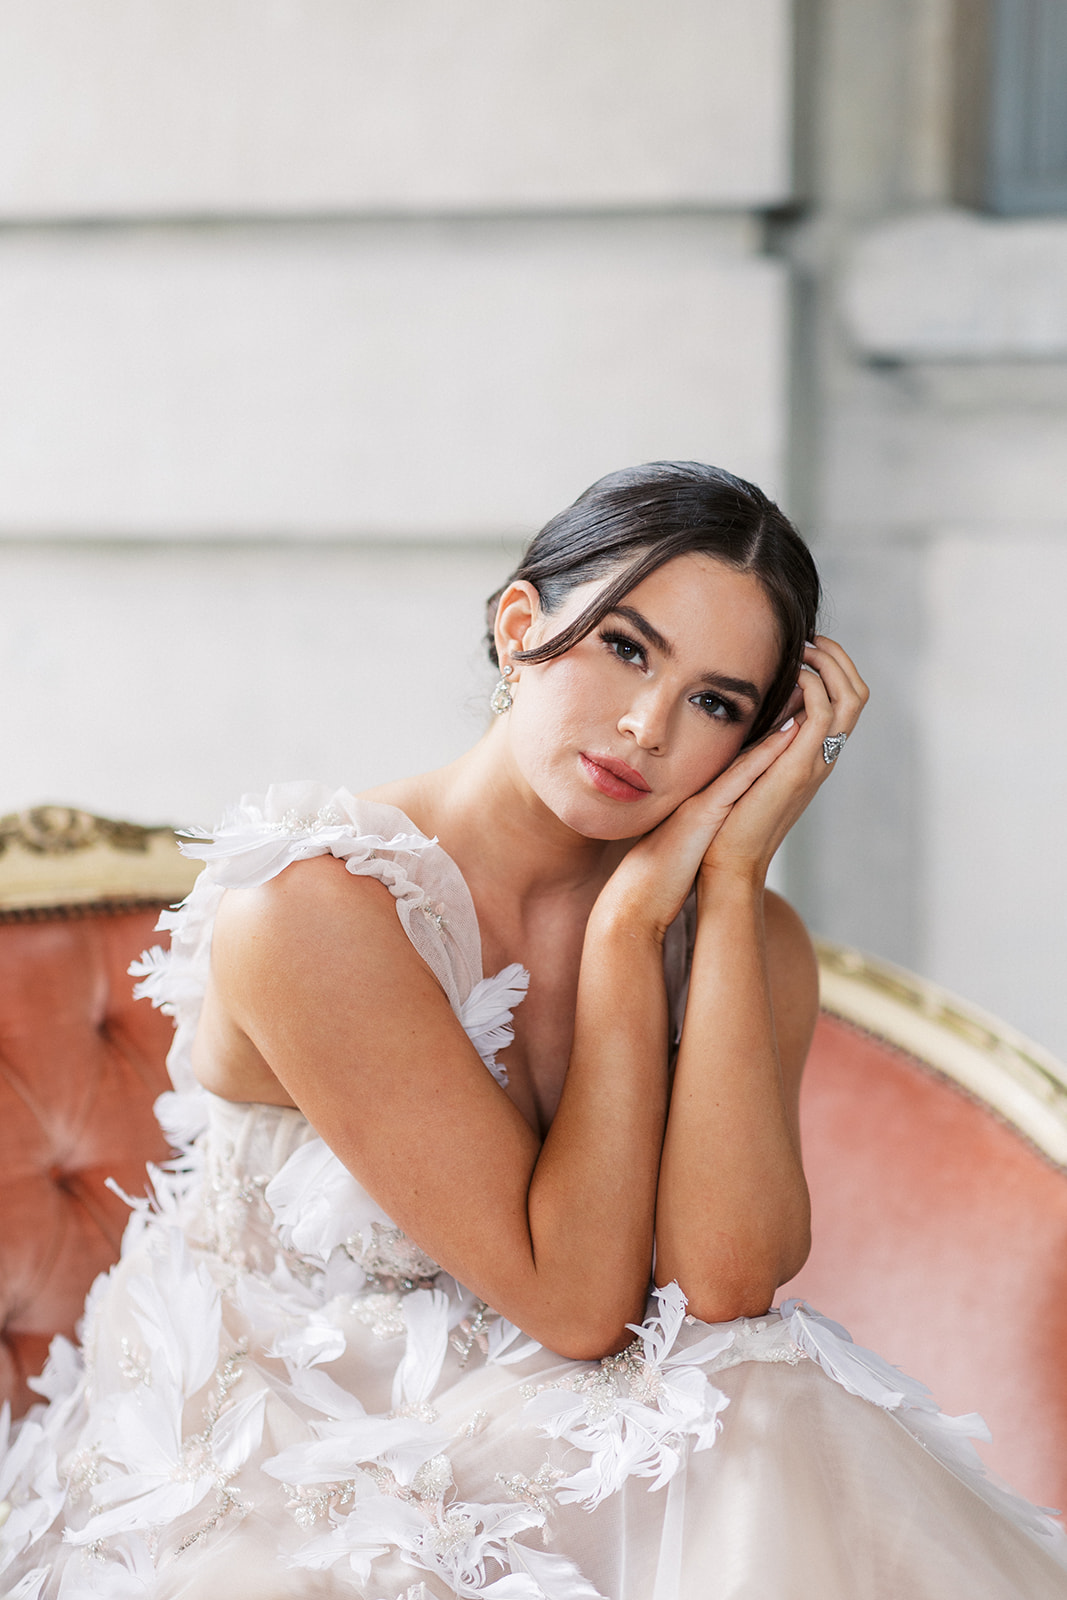 A bride rests her head on her hands while sitting on a pink antique couch outside